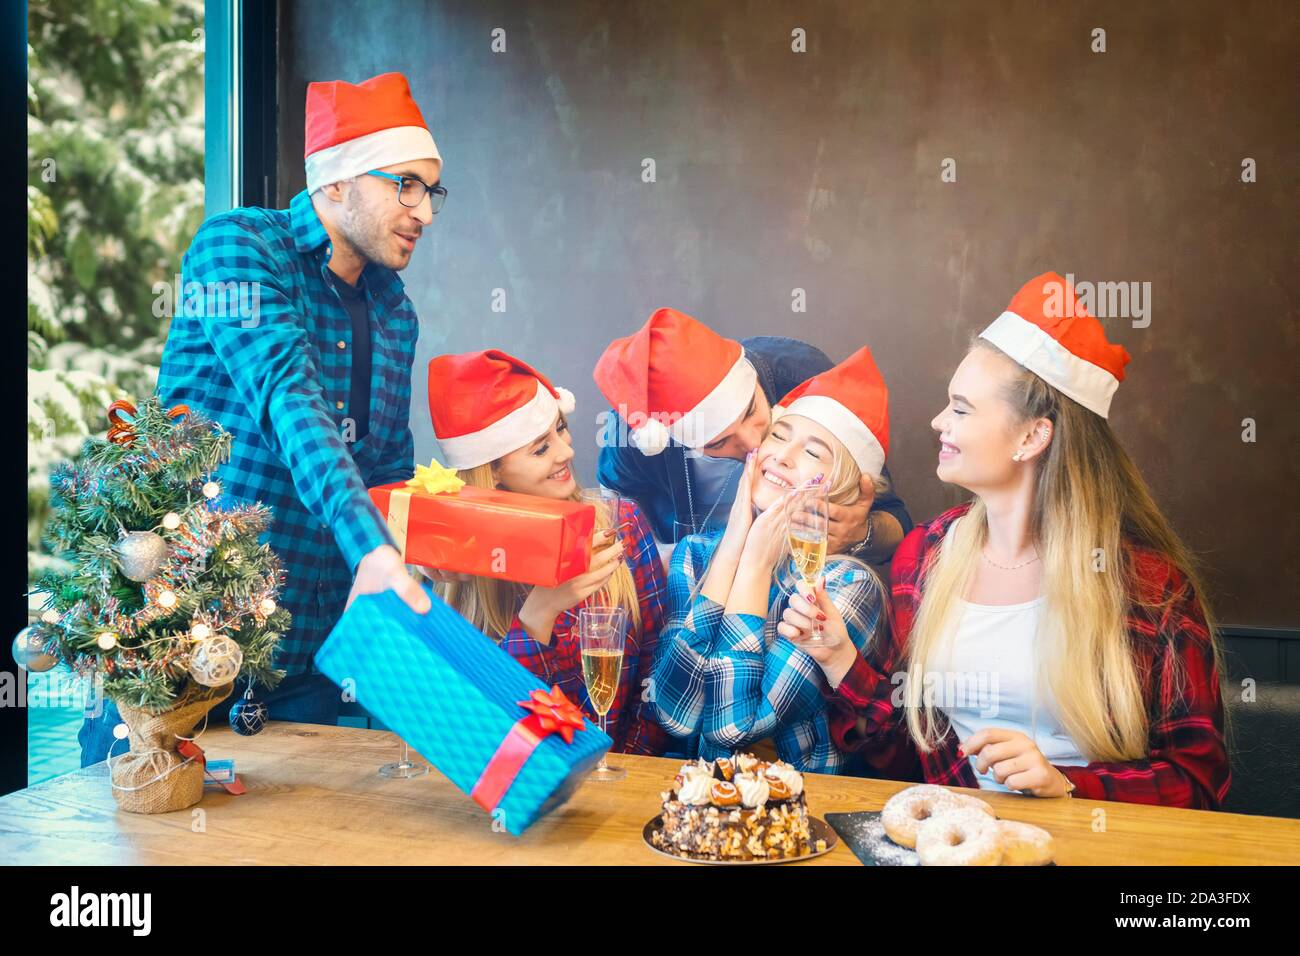 Group of friends with Santa hats celebrating Christmas by sharing gifts and drinking champagne at home dinner Stock Photo